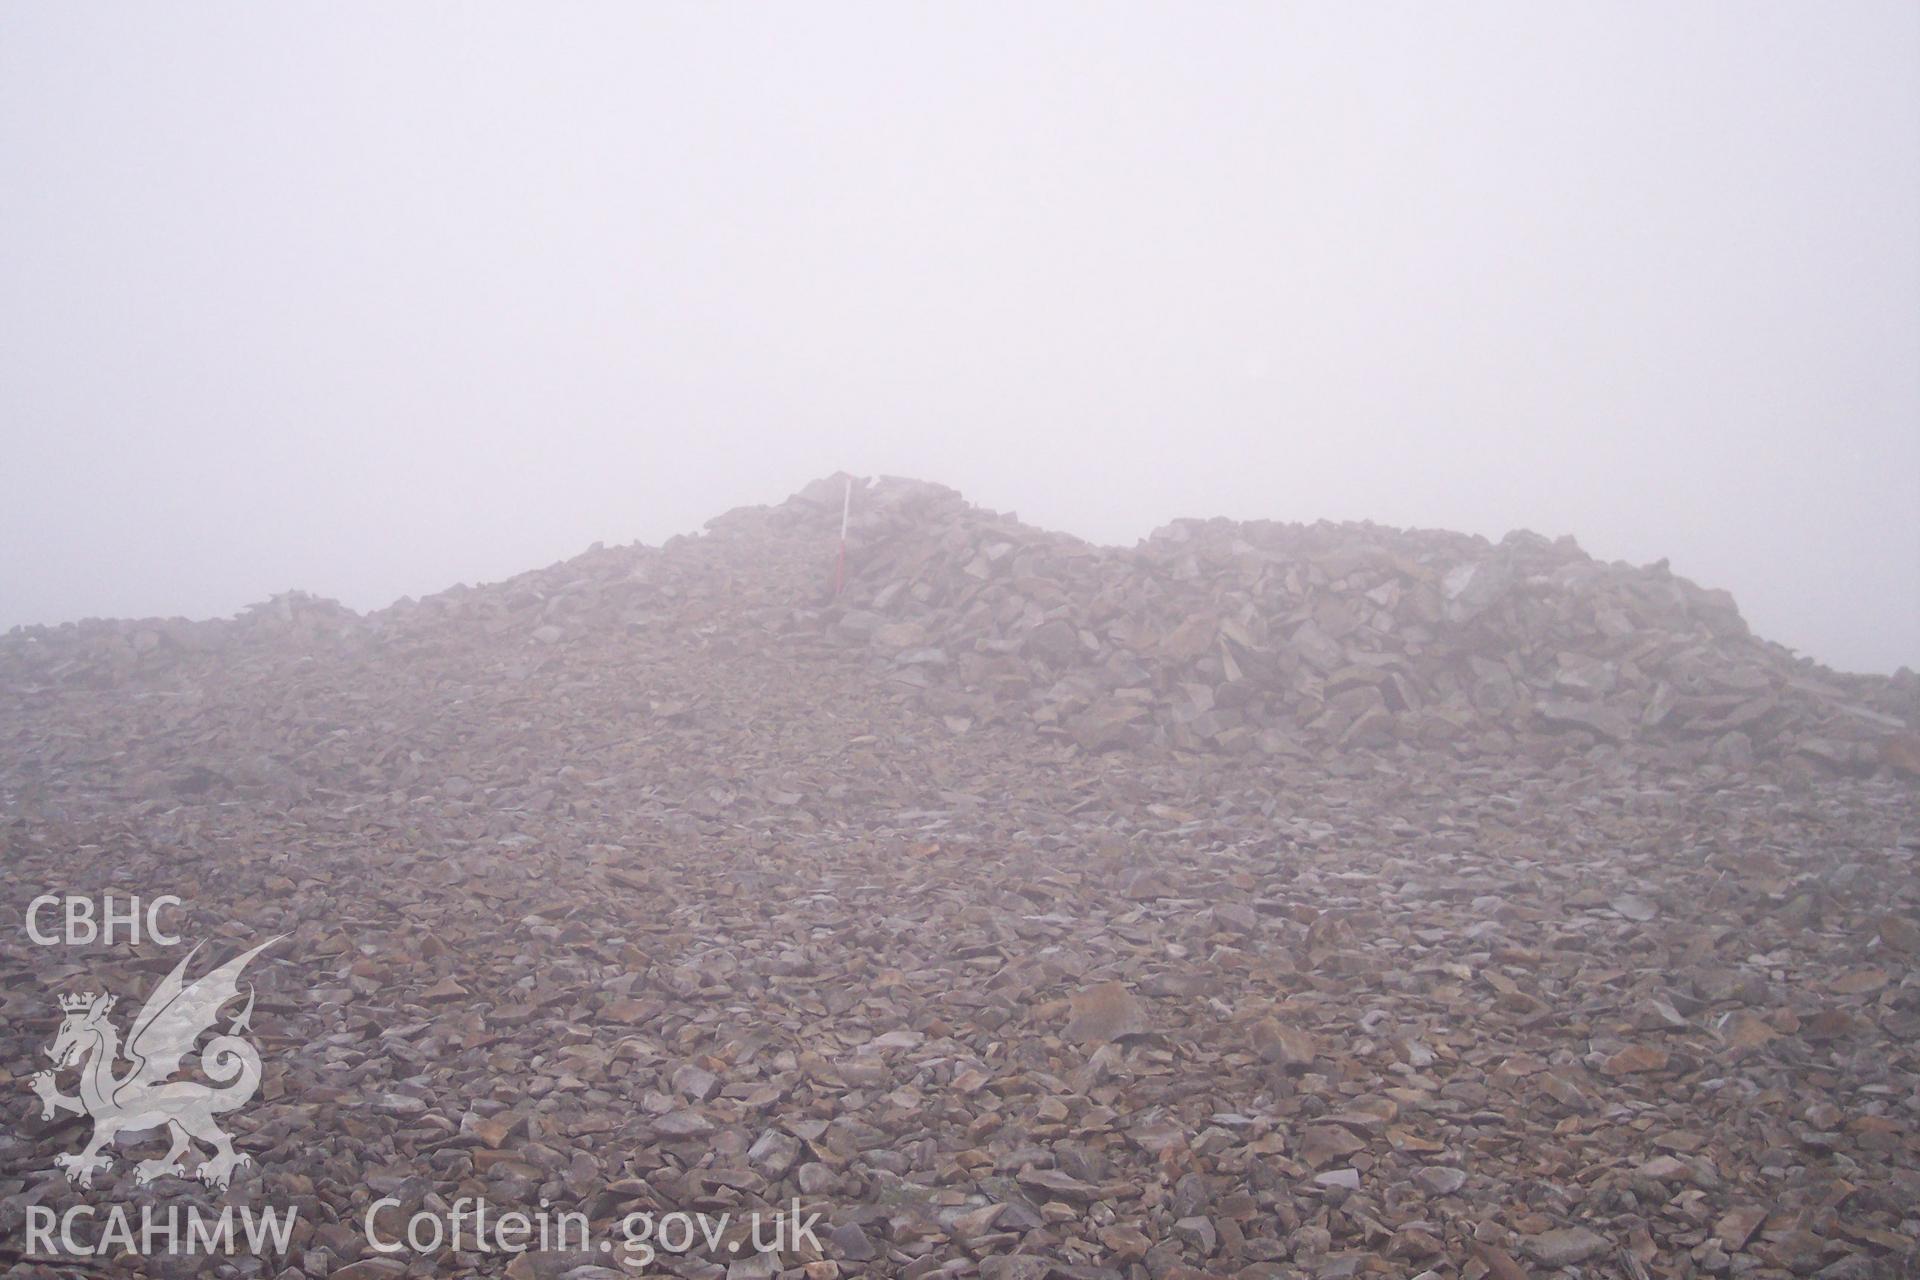 Photograph of Mynydd Mawr Cairn taken on 05/01/2006 by P.J. Schofield during an Upland Survey undertaken by Oxford Archaeology North.